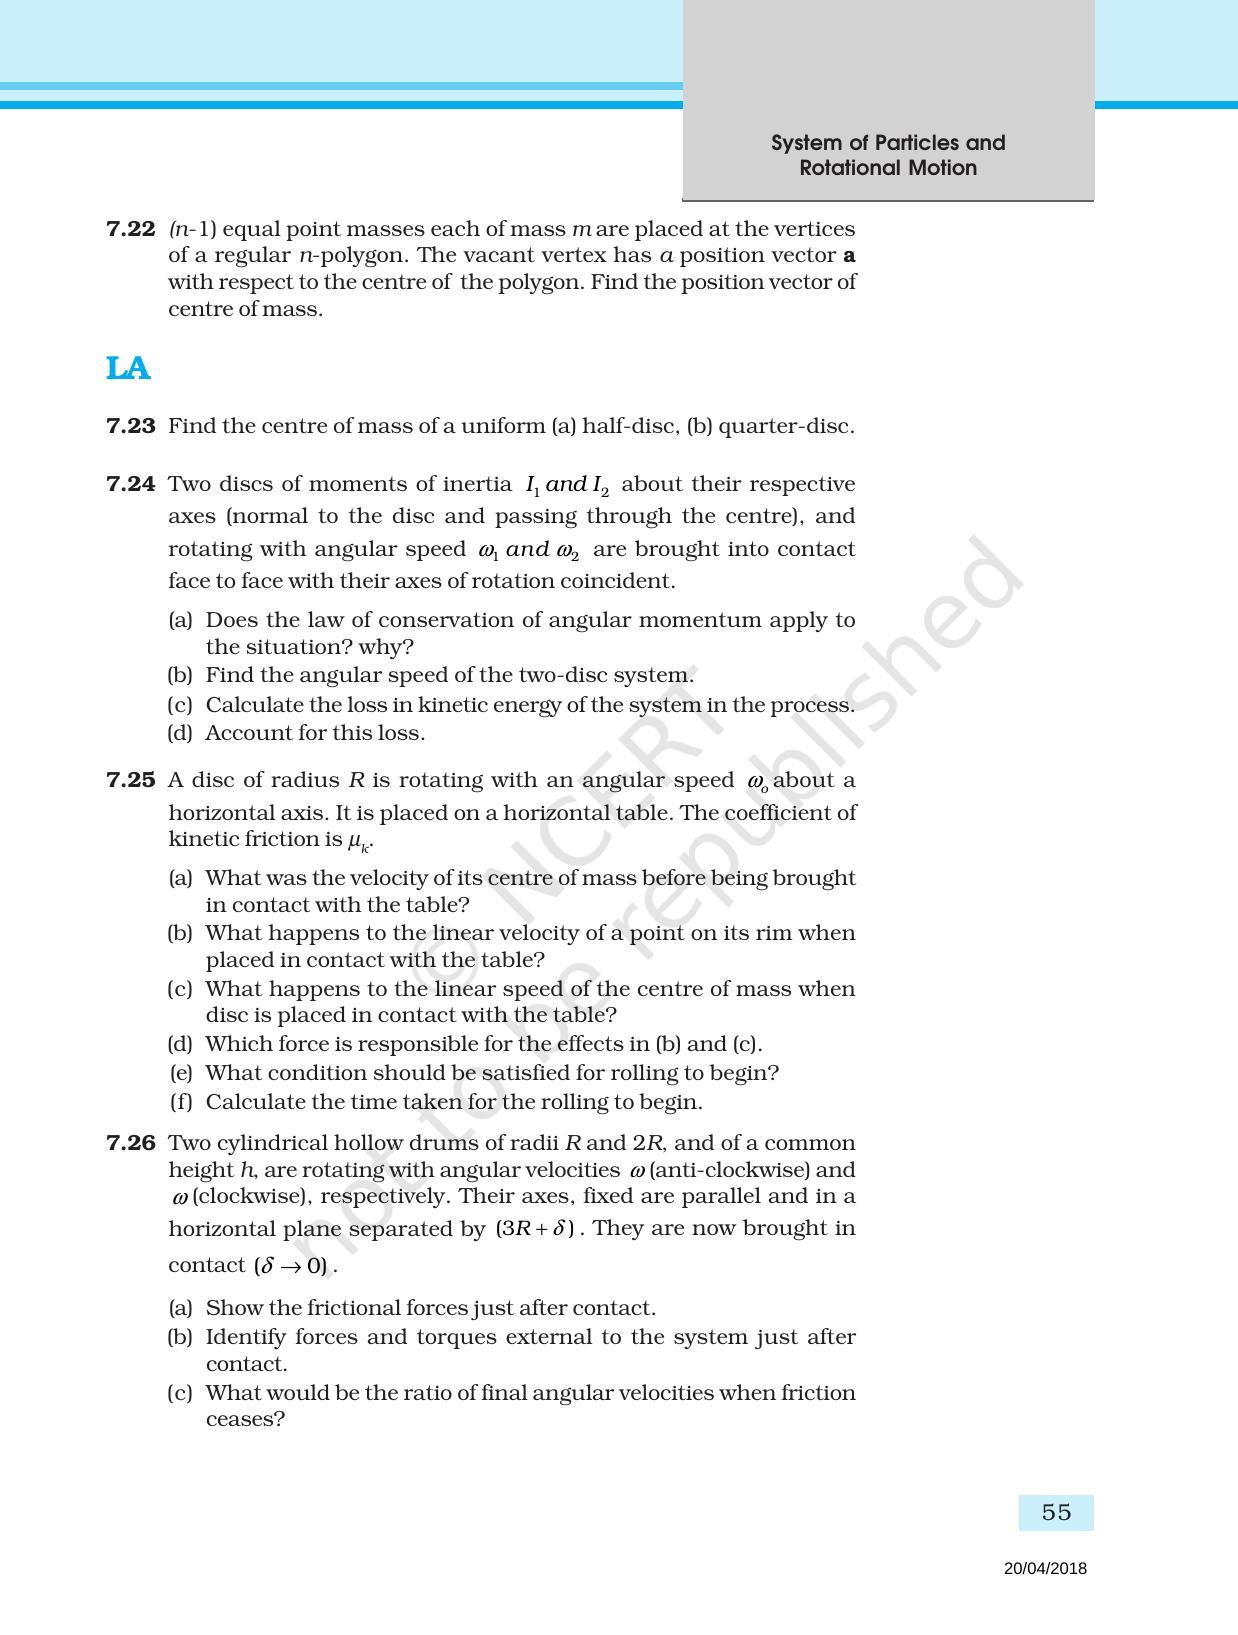 NCERT Exemplar Book for Class 11 Physics: Chapter 6 System of Particles and Rotational Motion - Page 6